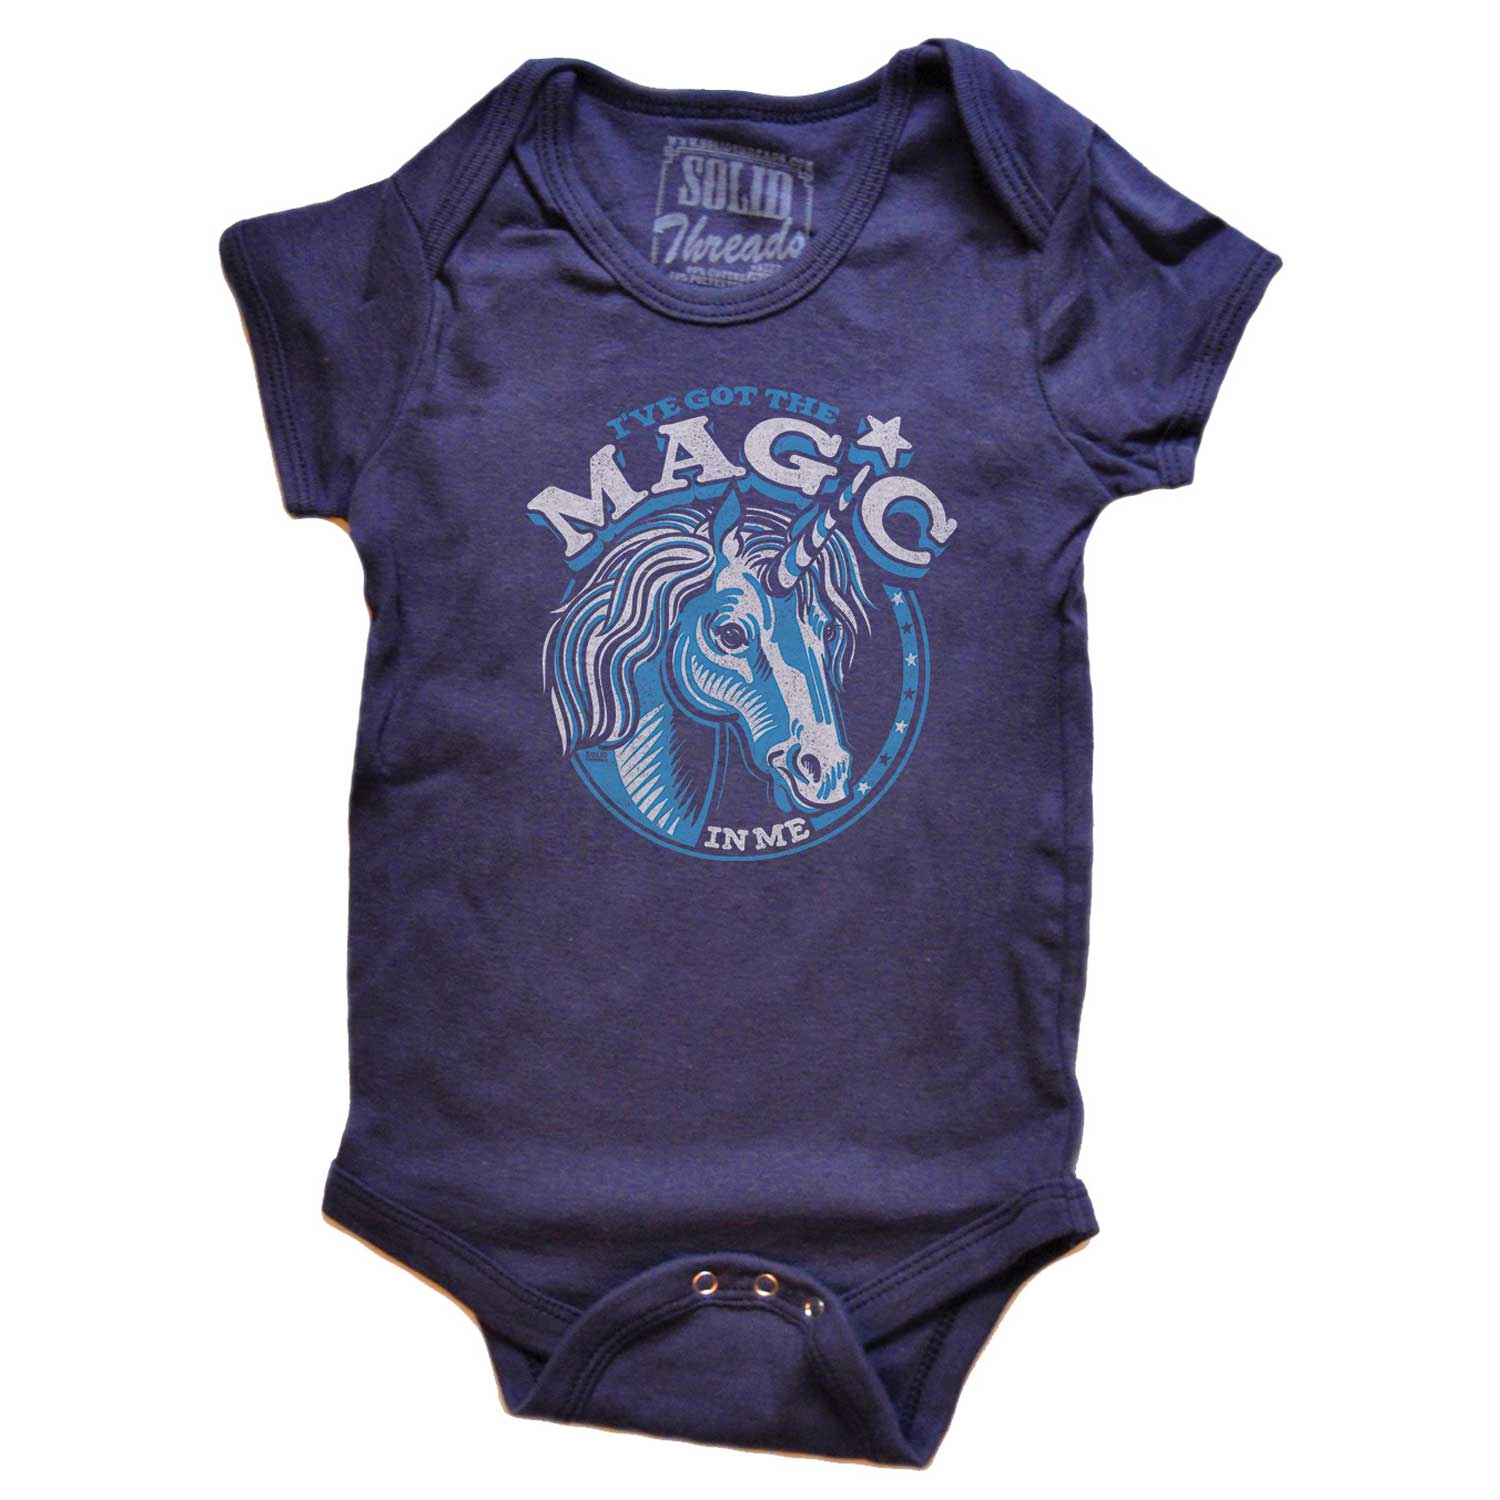 Baby Got The Magic in Me Retro Unicorn Graphic One Piece | Cute Horse Baby Romper | Solid Threads